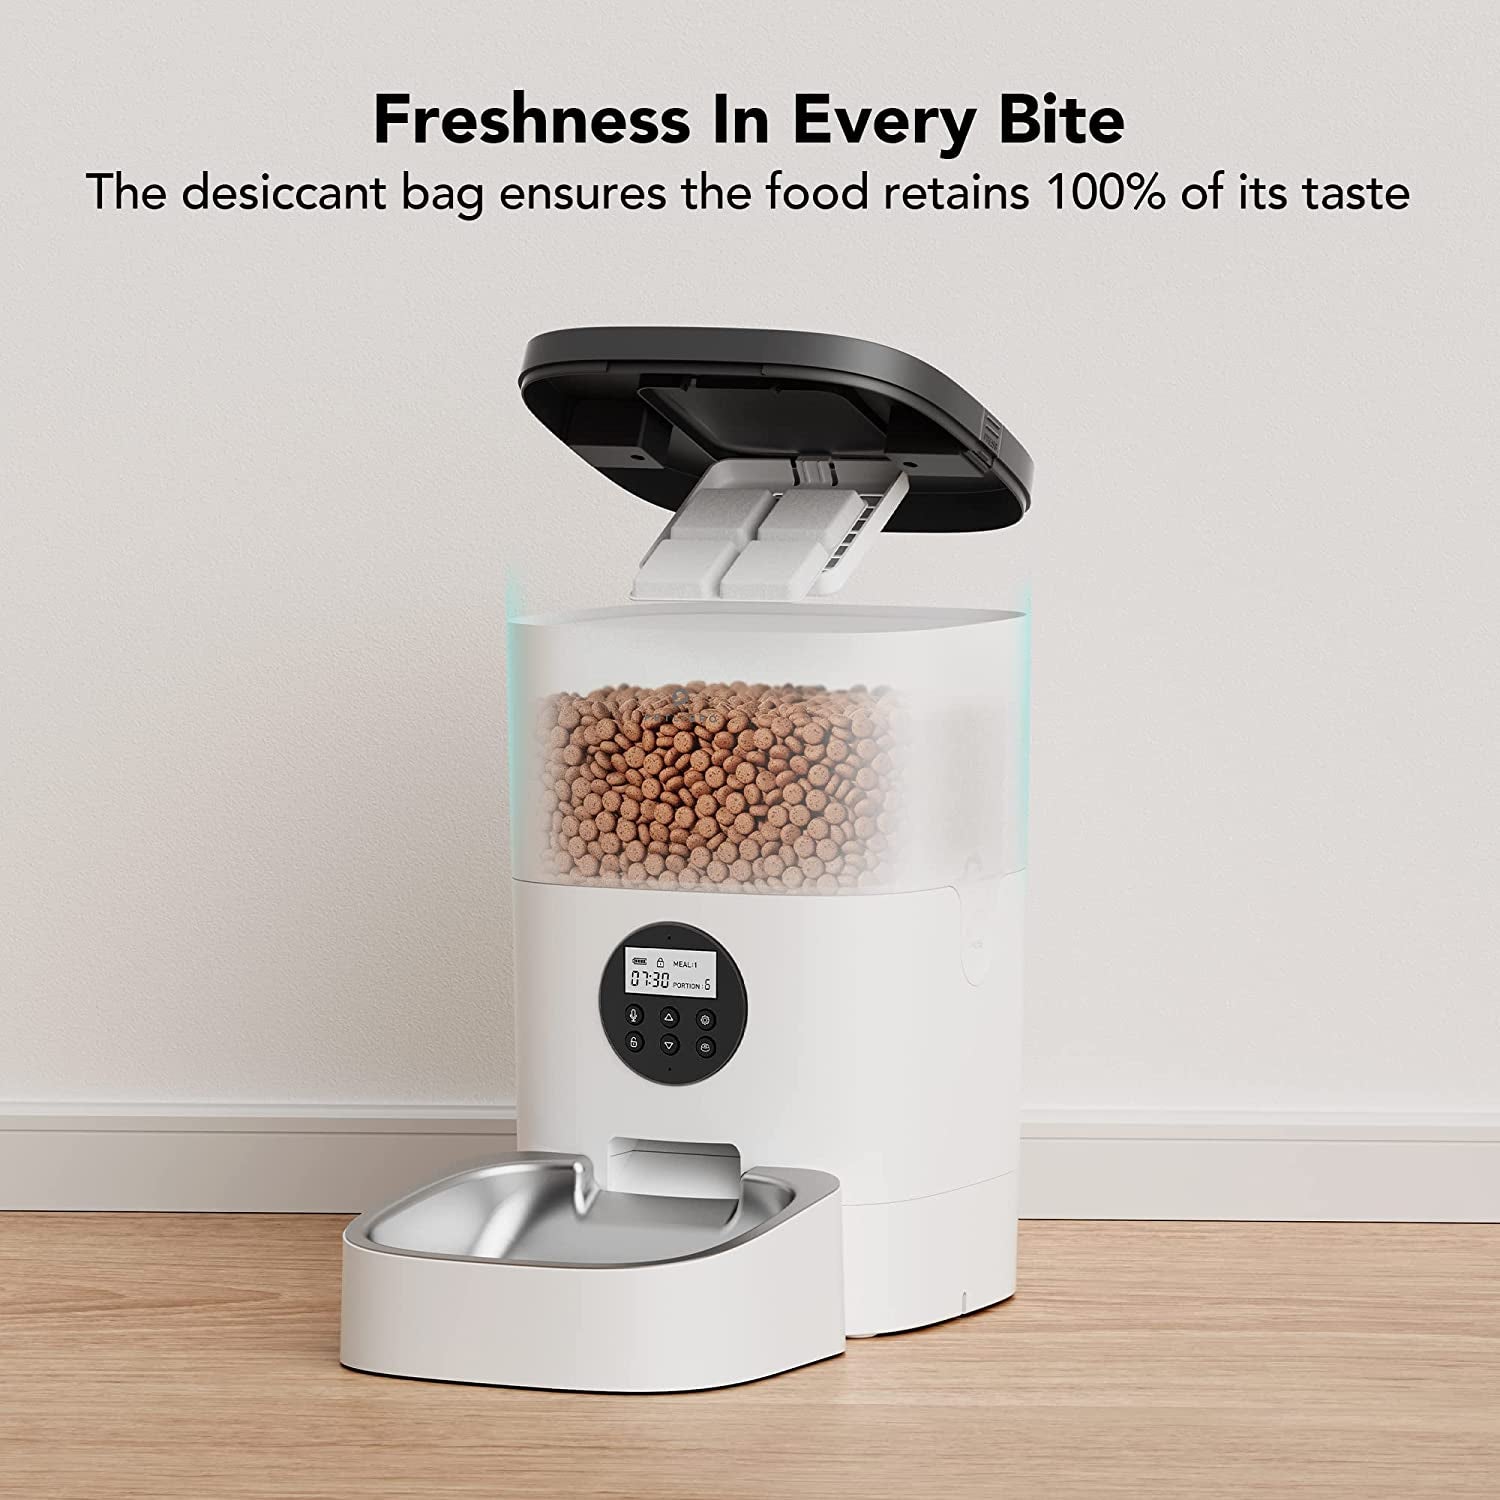 Automatic Cat Food Dispenser, Automatic Cat Feeder with Customize Feeding Schedule, Auto Cat Feeder with Interactive Voice Recorder, Timed Pet Feeder for Cat & Dog 1-4 Meals Dry Food 4L